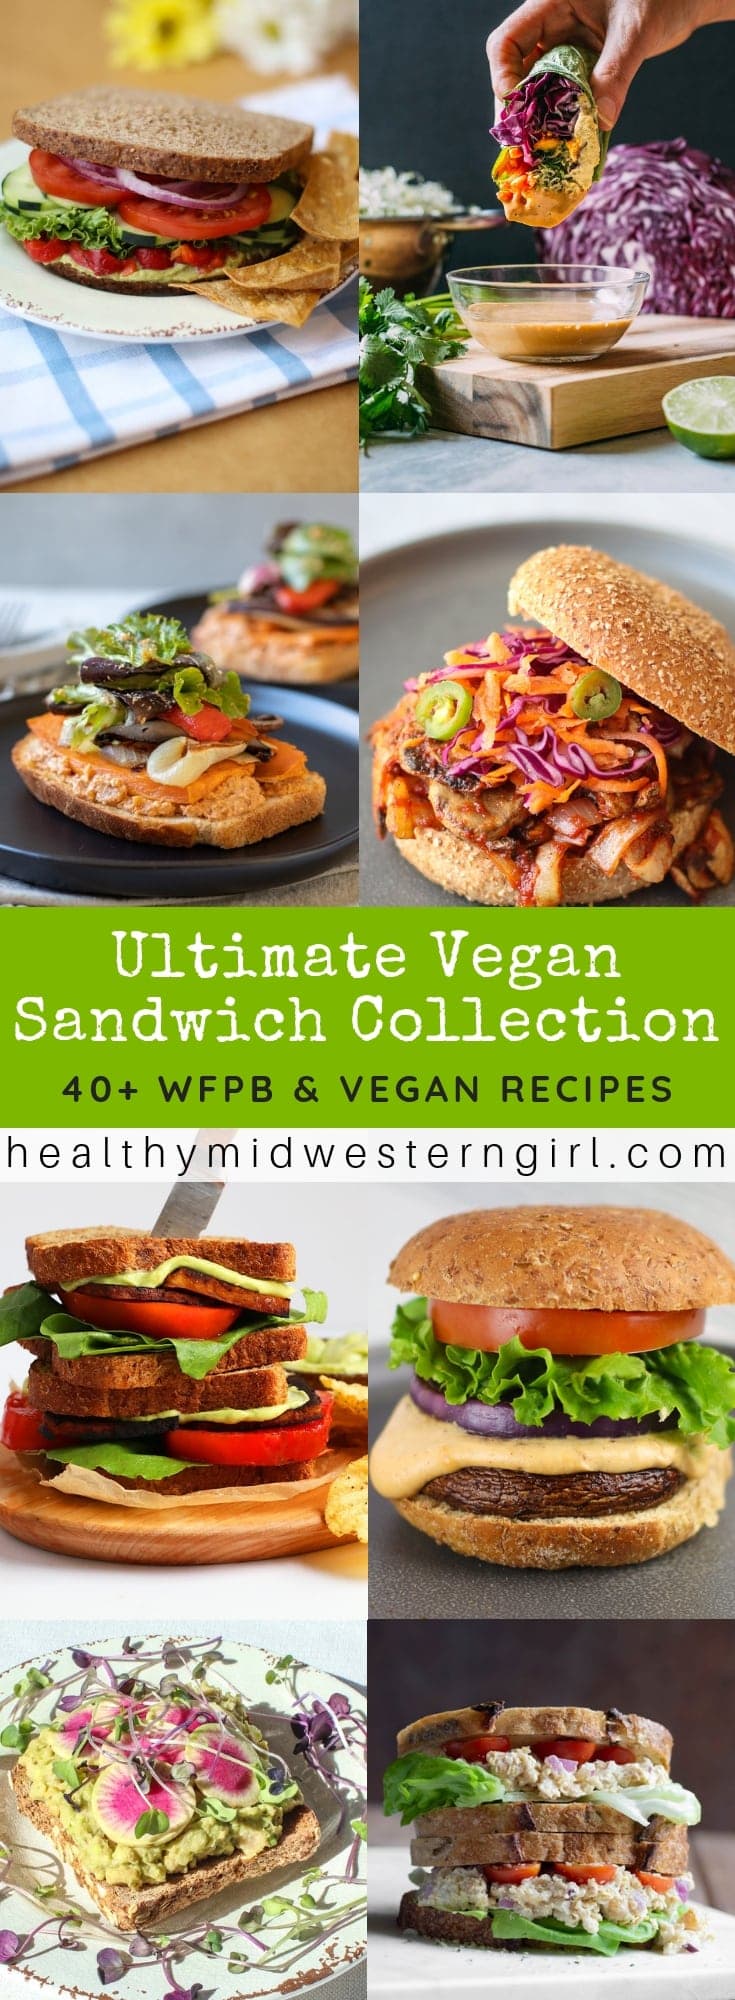 Vegan Sandwiches - The Ultimate Collection • Healthy Midwestern Girl